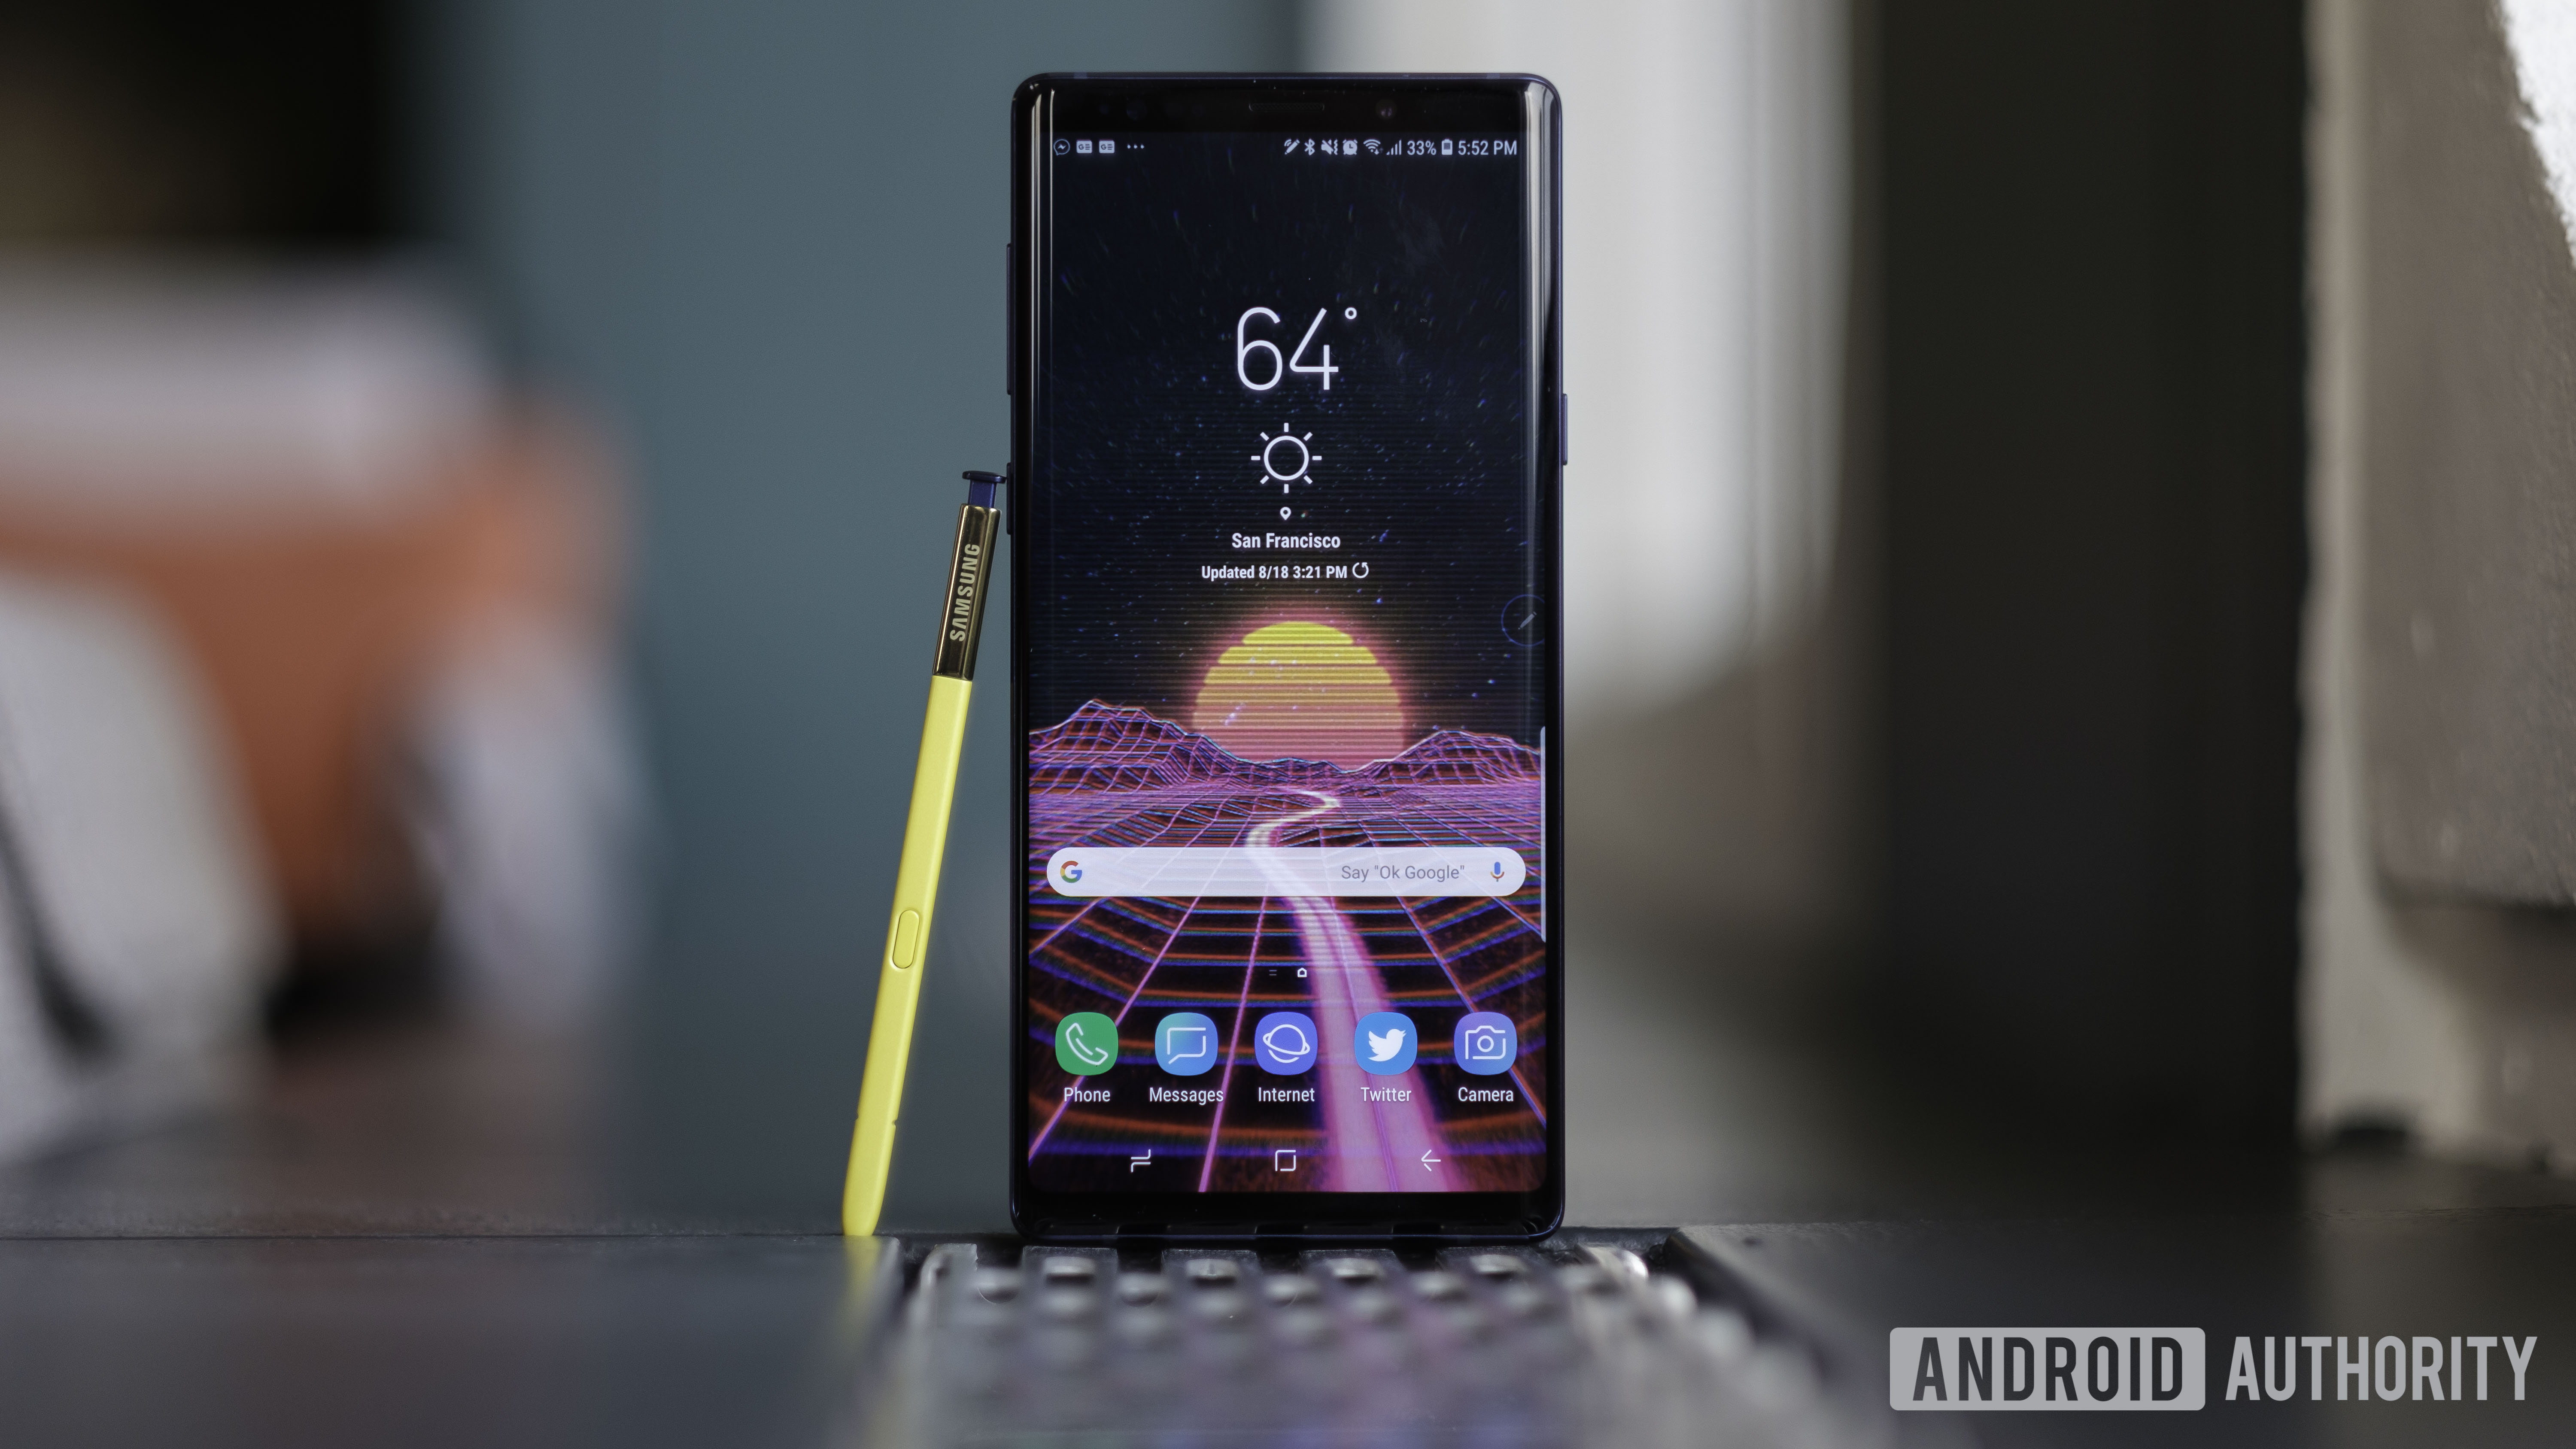 The Samsung Galaxy Note 10 will have at least one major upgrade over the Note 9.